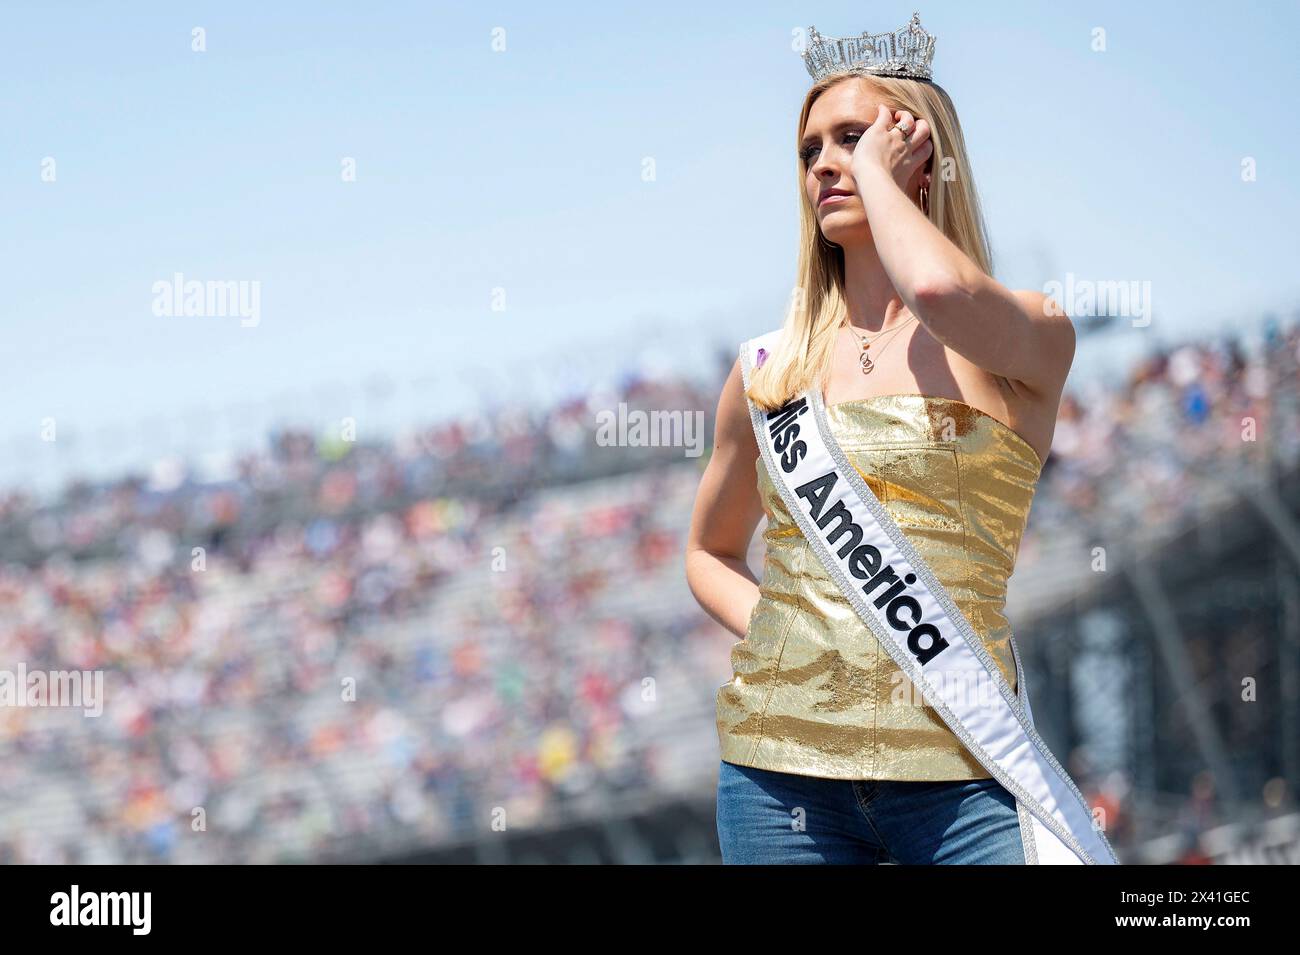 Dover, United States Of America. 28th Apr, 2024. Dover, United States of America. 28 April, 2024. U.S Air Force 2nd Lt. Madison Marsh, Miss America 2024, poses on the racetrack before the Würth 400 NASCAR at the Dover Motor Speedway, April 28, 2024 in Dover, Delaware. Marsh, a 22-year-old U.S. Air Force Academy graduate is the first active duty military officer to hold the crown as Miss America. Credit: Miriam Thurber/U.S Air Force Photo/Alamy Live News Stock Photo